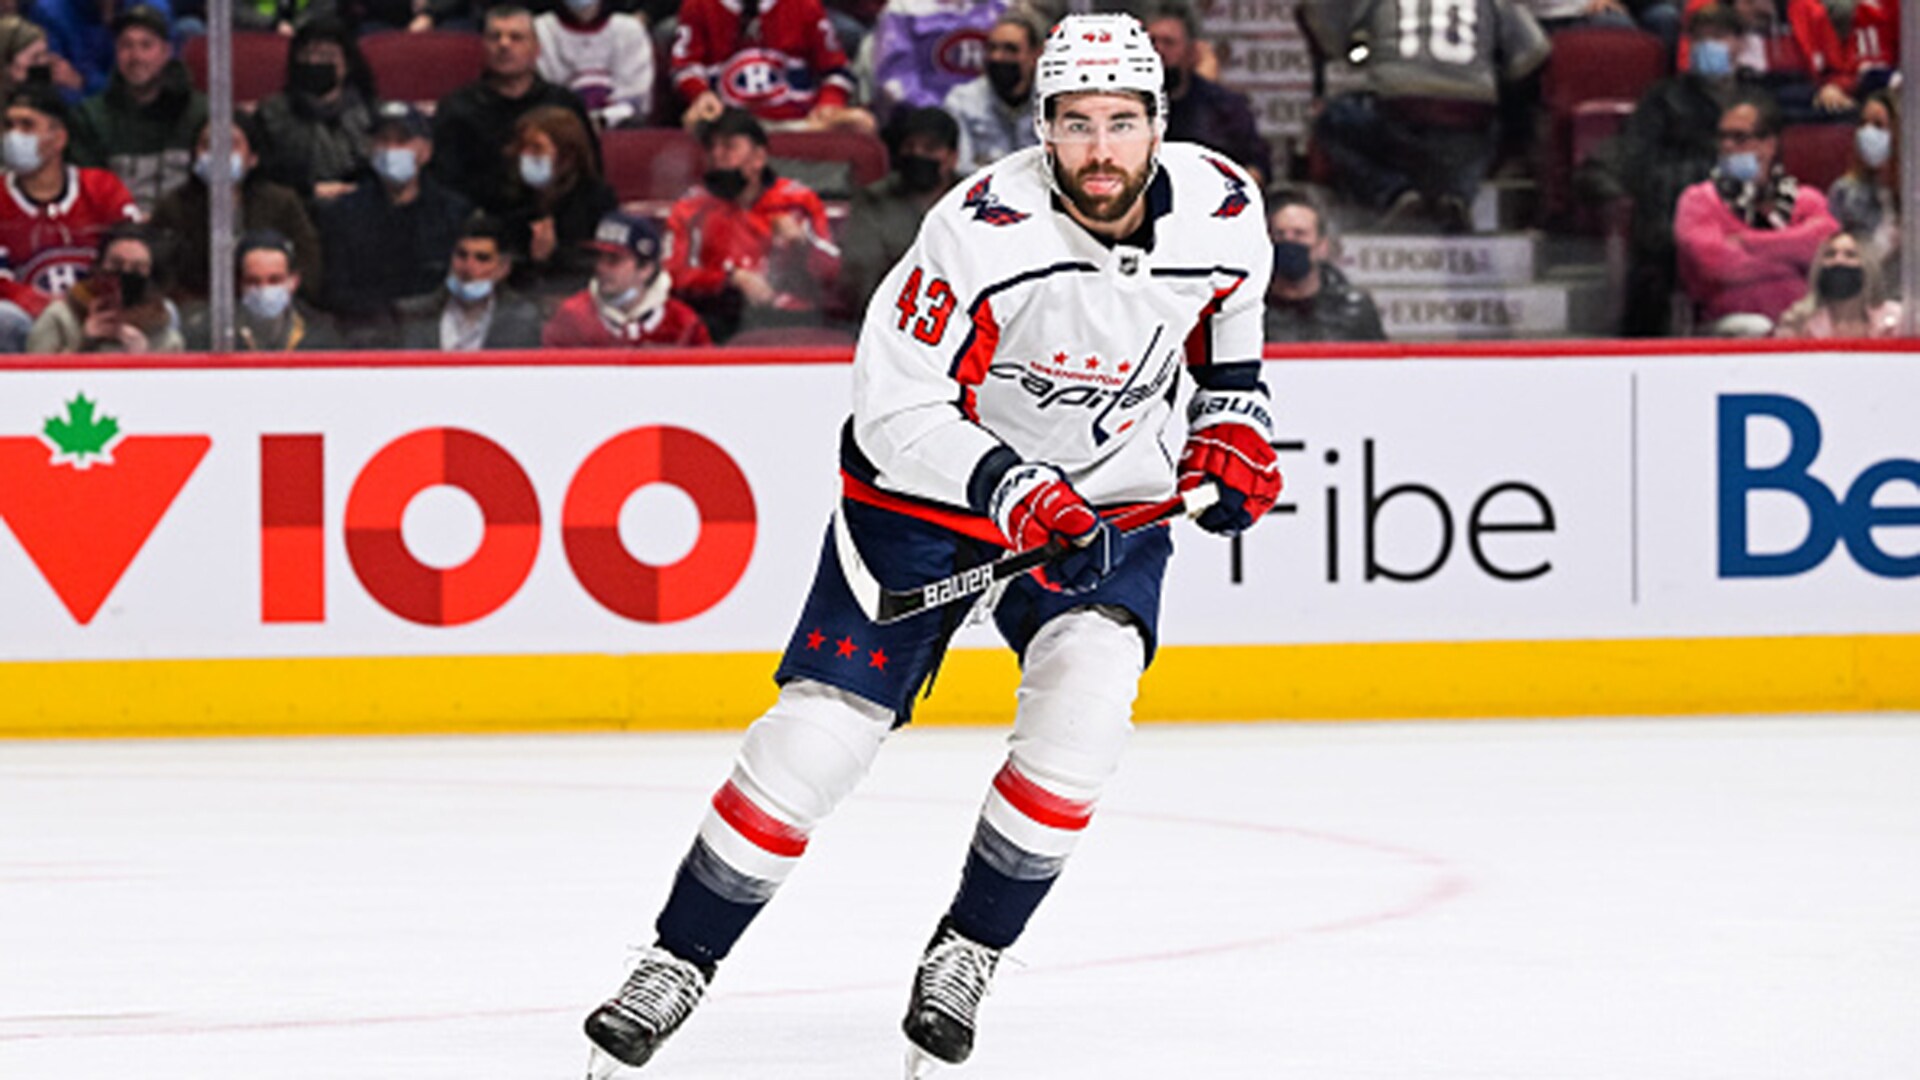 Capitals: Tom Wilson signs off on massive 7-year, $45.5 million